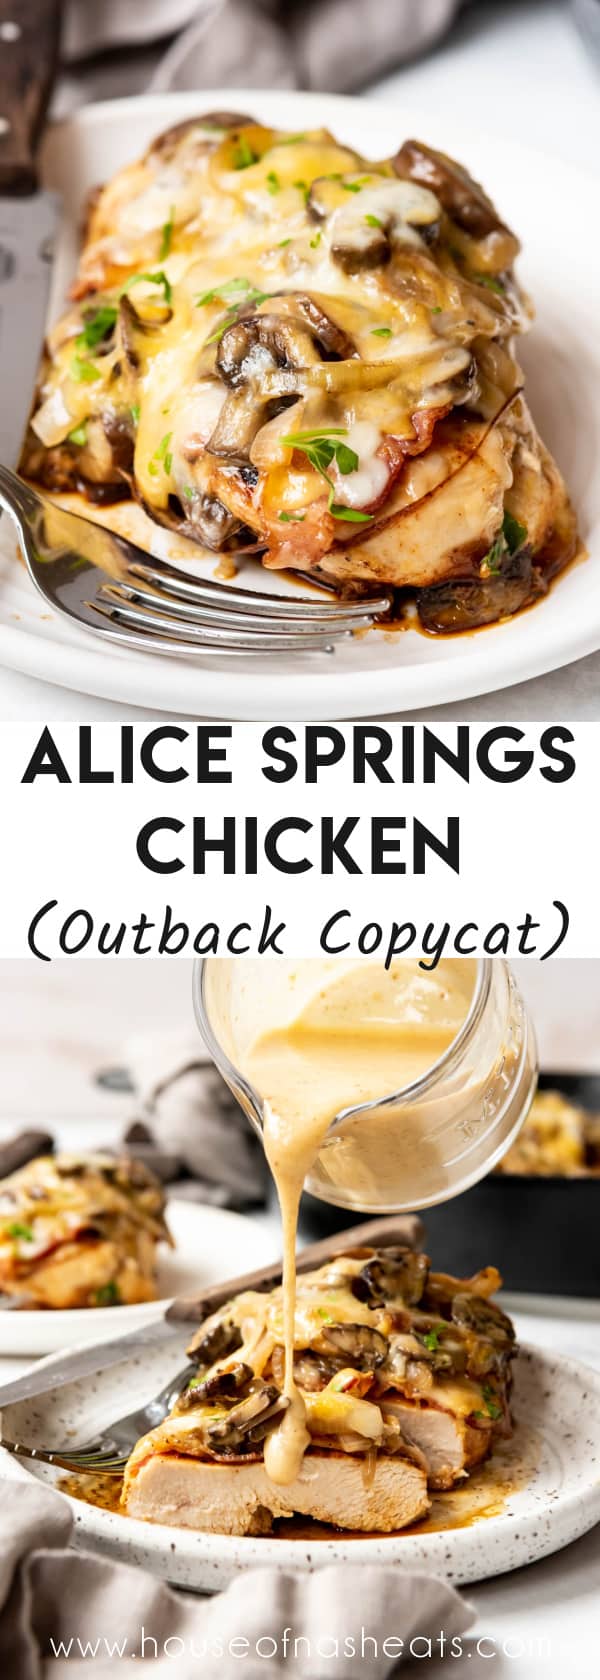 A collage of images of Outback copycat Alice Springs chicken with text overlay.